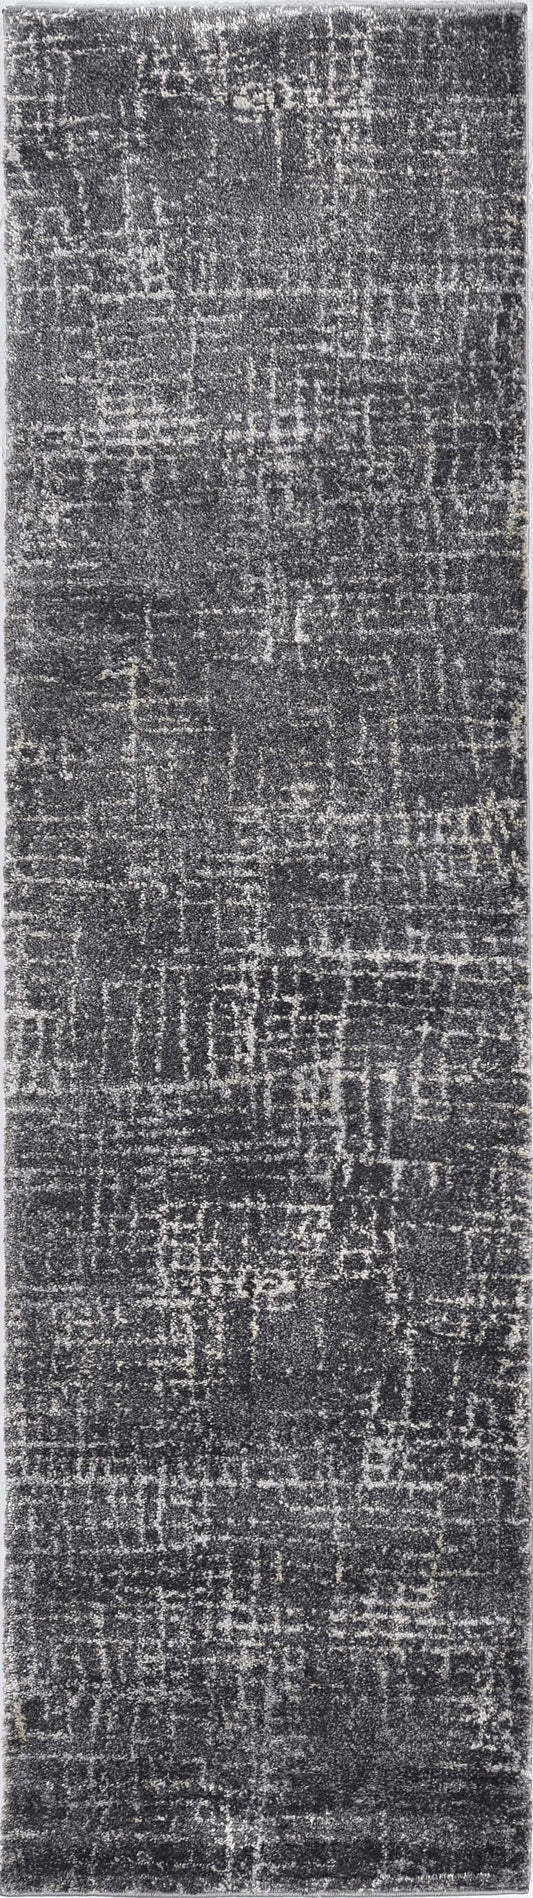 2' X 7' Grey Abstract Lines Runner Rug